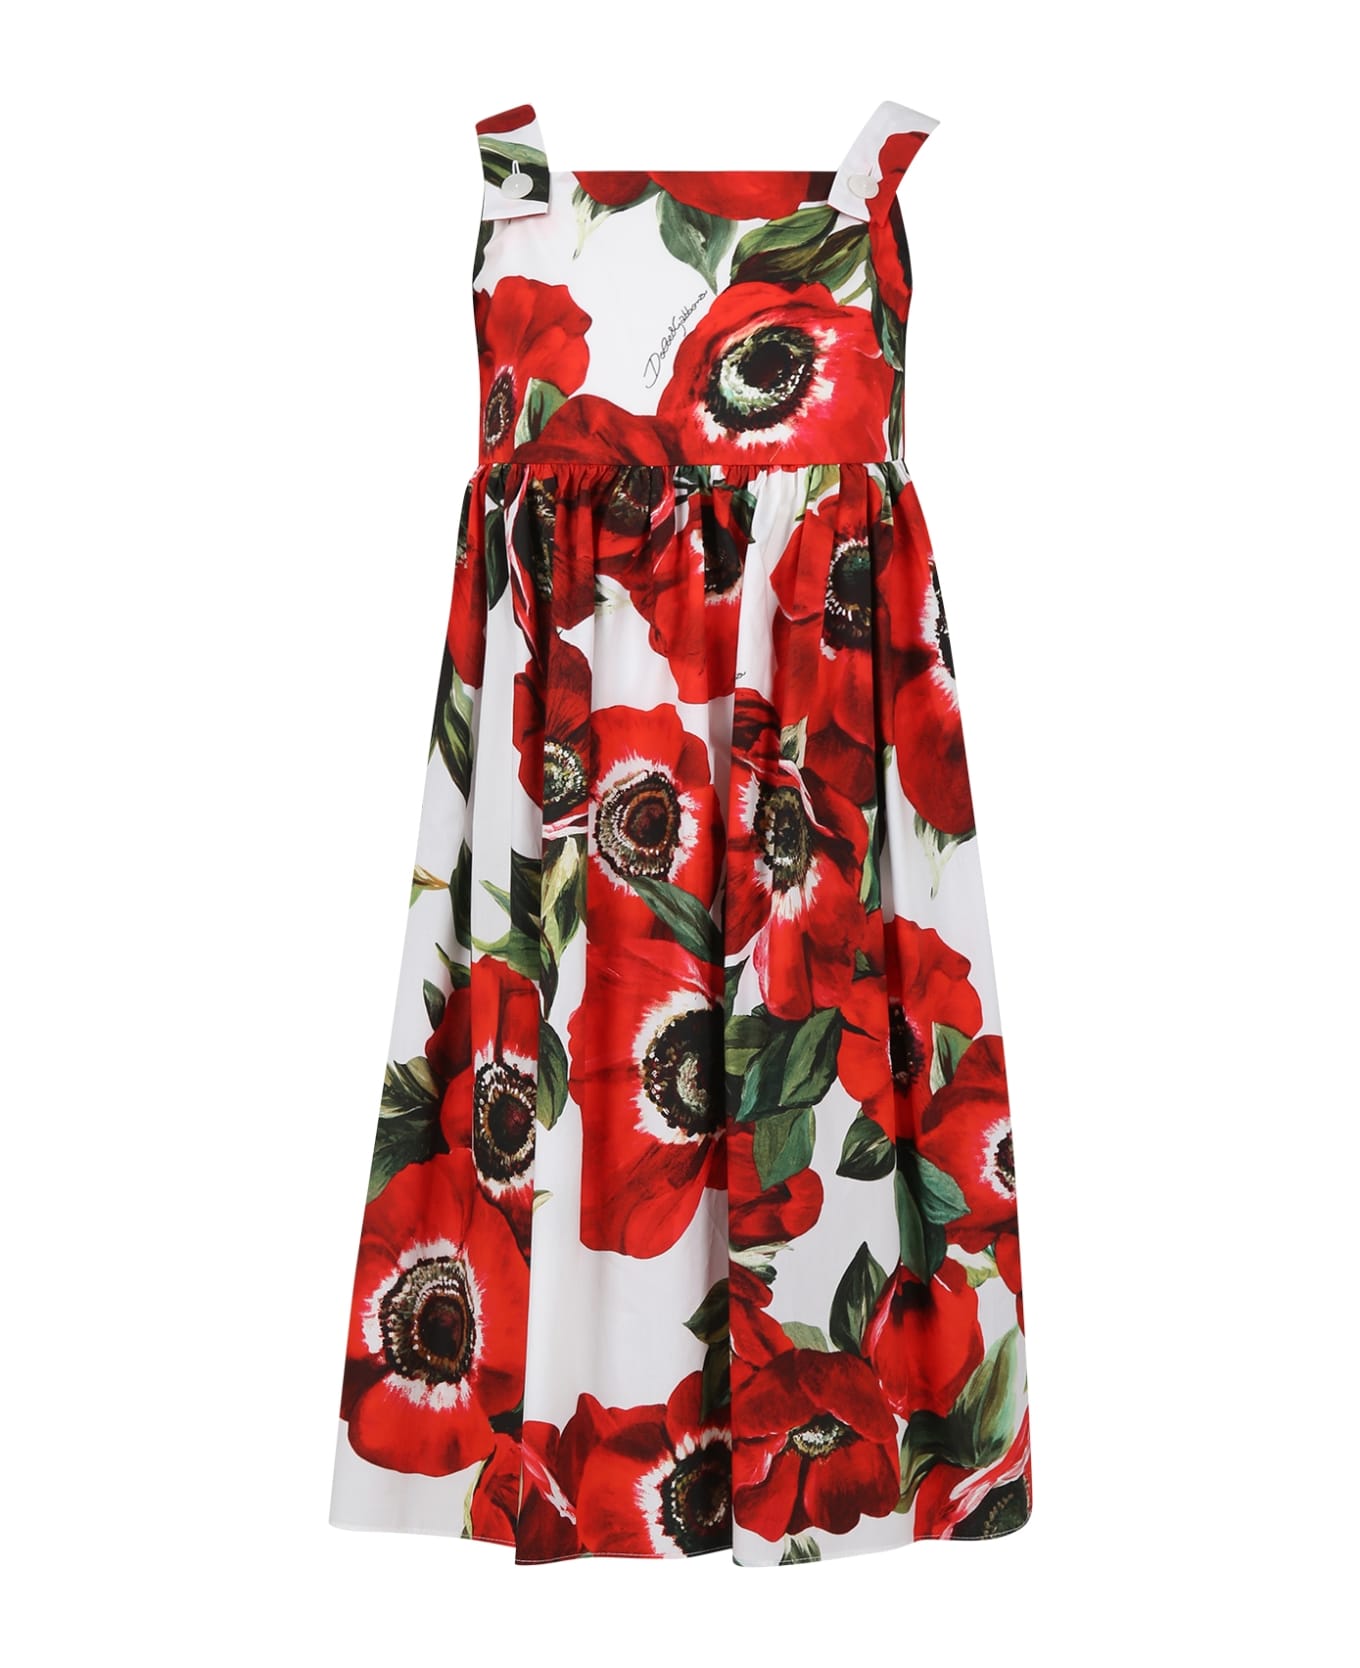 Dolce & Gabbana Red Dress For Girl With Poppies Print - Red